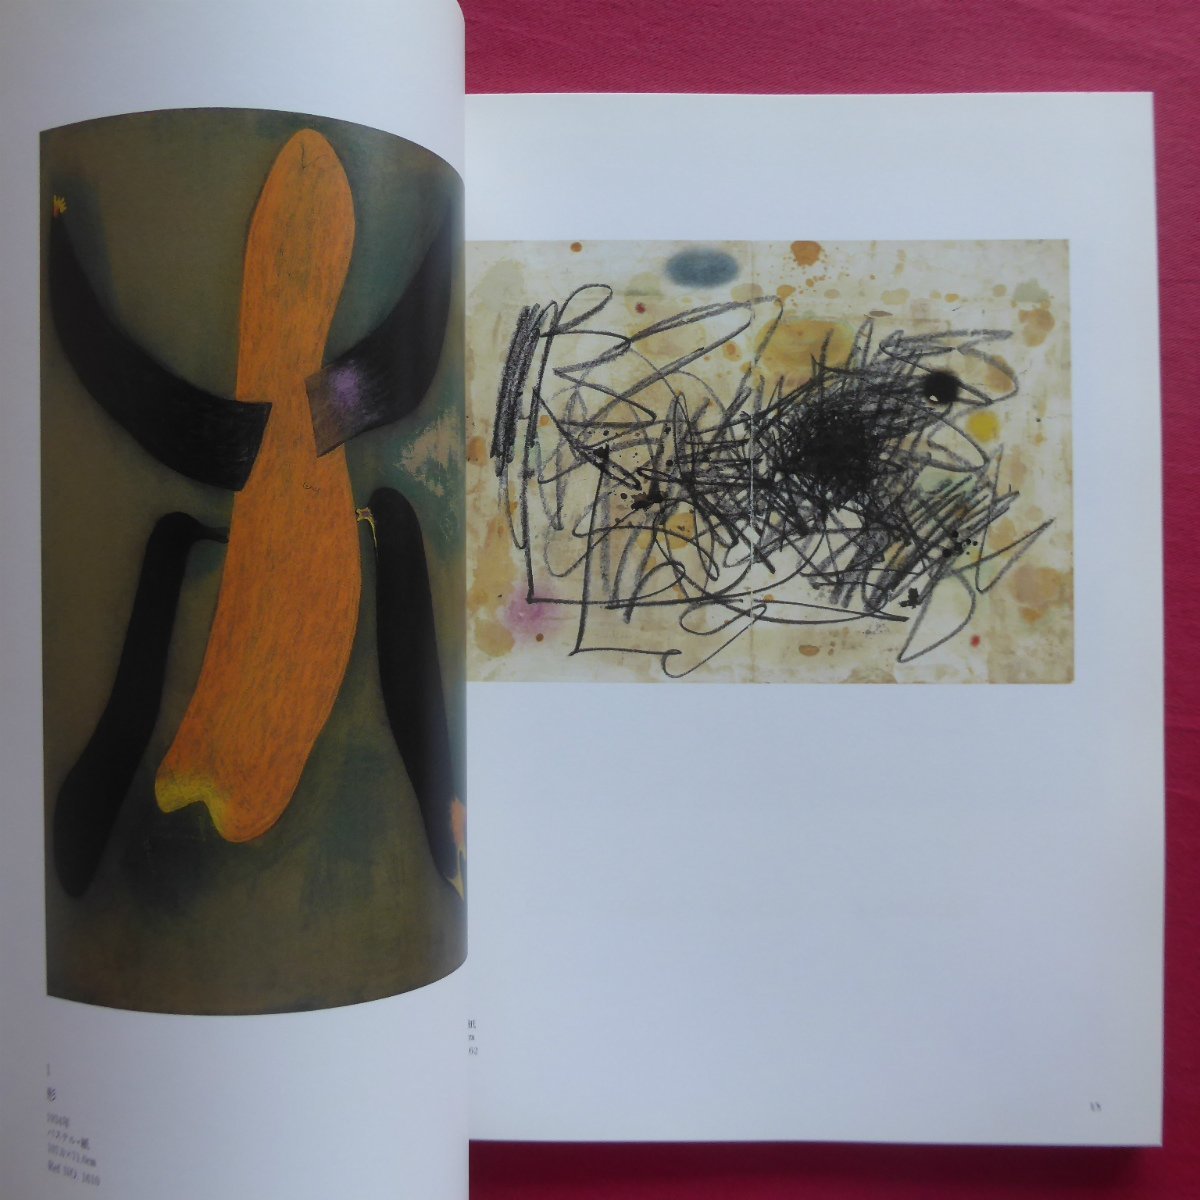 o3 llustrated book [ purity . free art miro exhibition - sun * month * star * bird . woman ..-/1997-98 year * art gallery [..]KYOTO]. rice field ...:miro. . chapter 